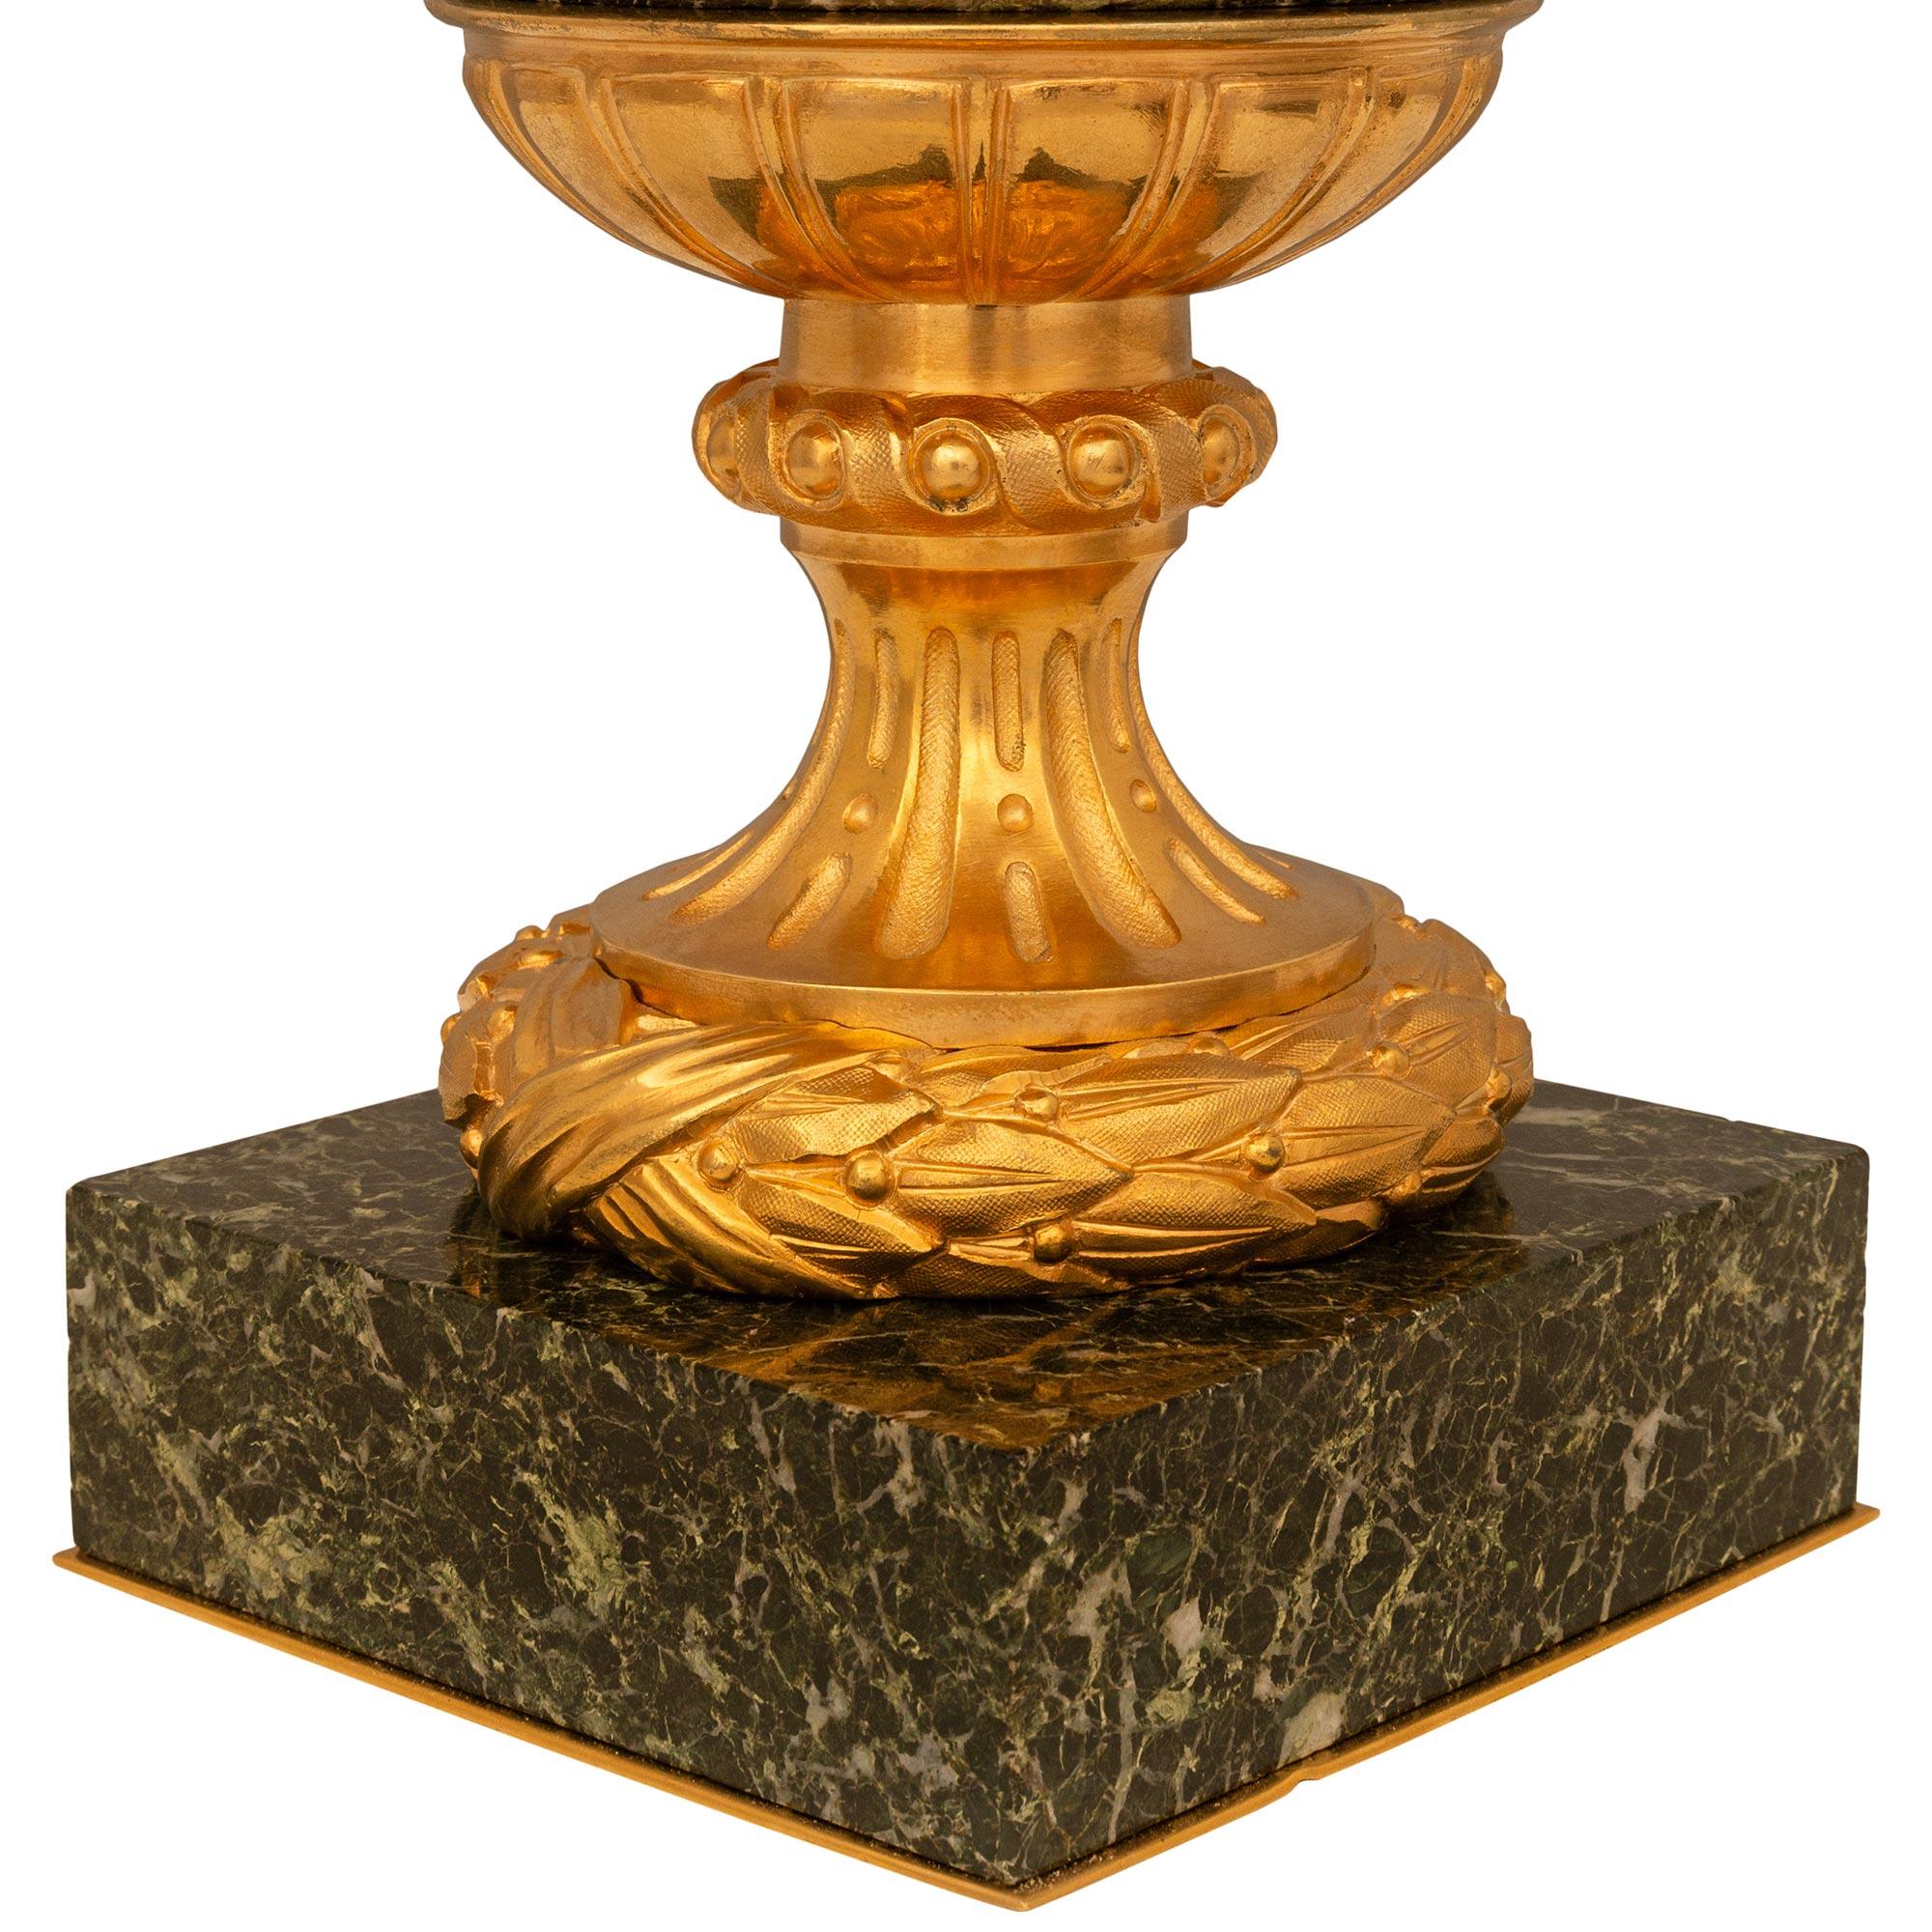 Pair of Stunning French 19th Century Vert Patricia Marble and Ormolu Lidded Urns For Sale 6